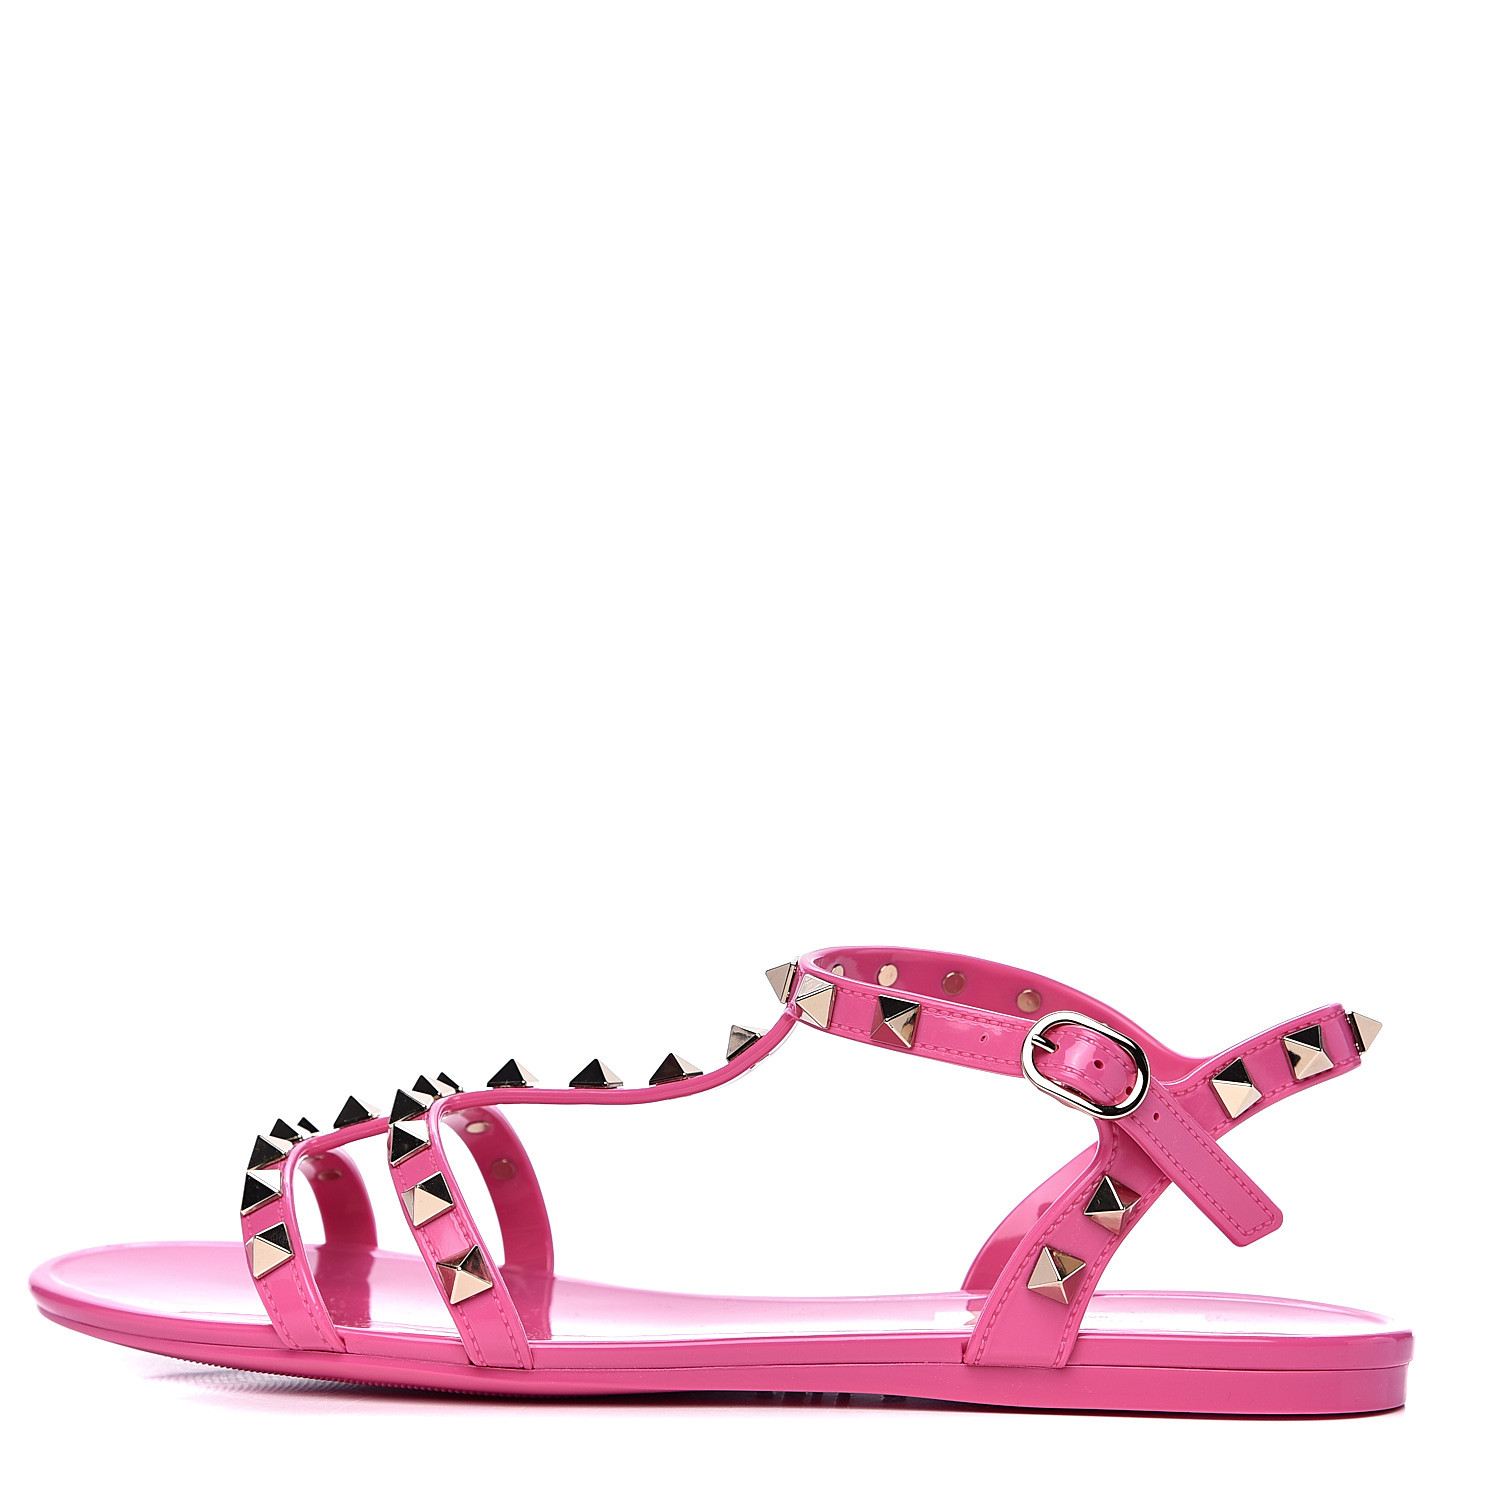 VALENTINO PVC Jelly Rockstud Caged Sandals 37 Pink 536670